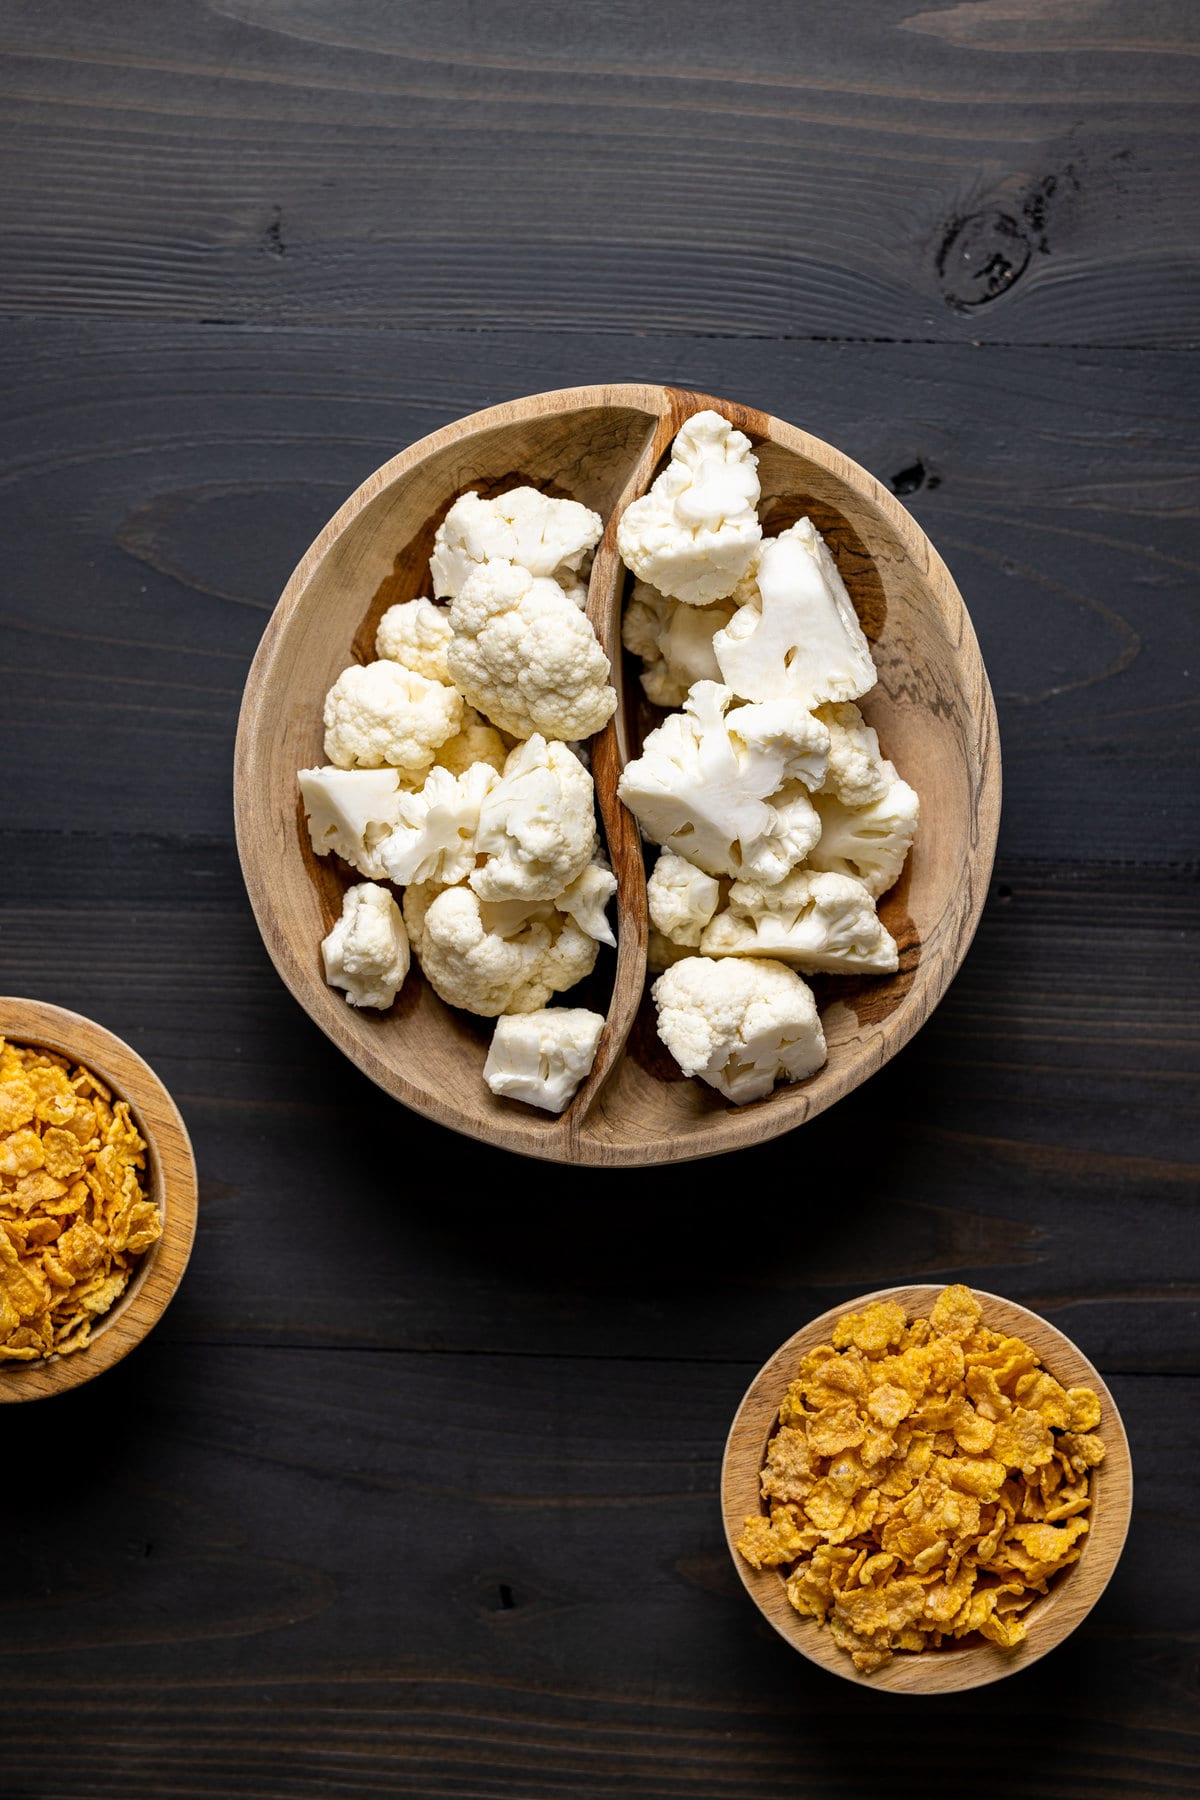 Wooden bowls of chopped cauliflower and corn flakes